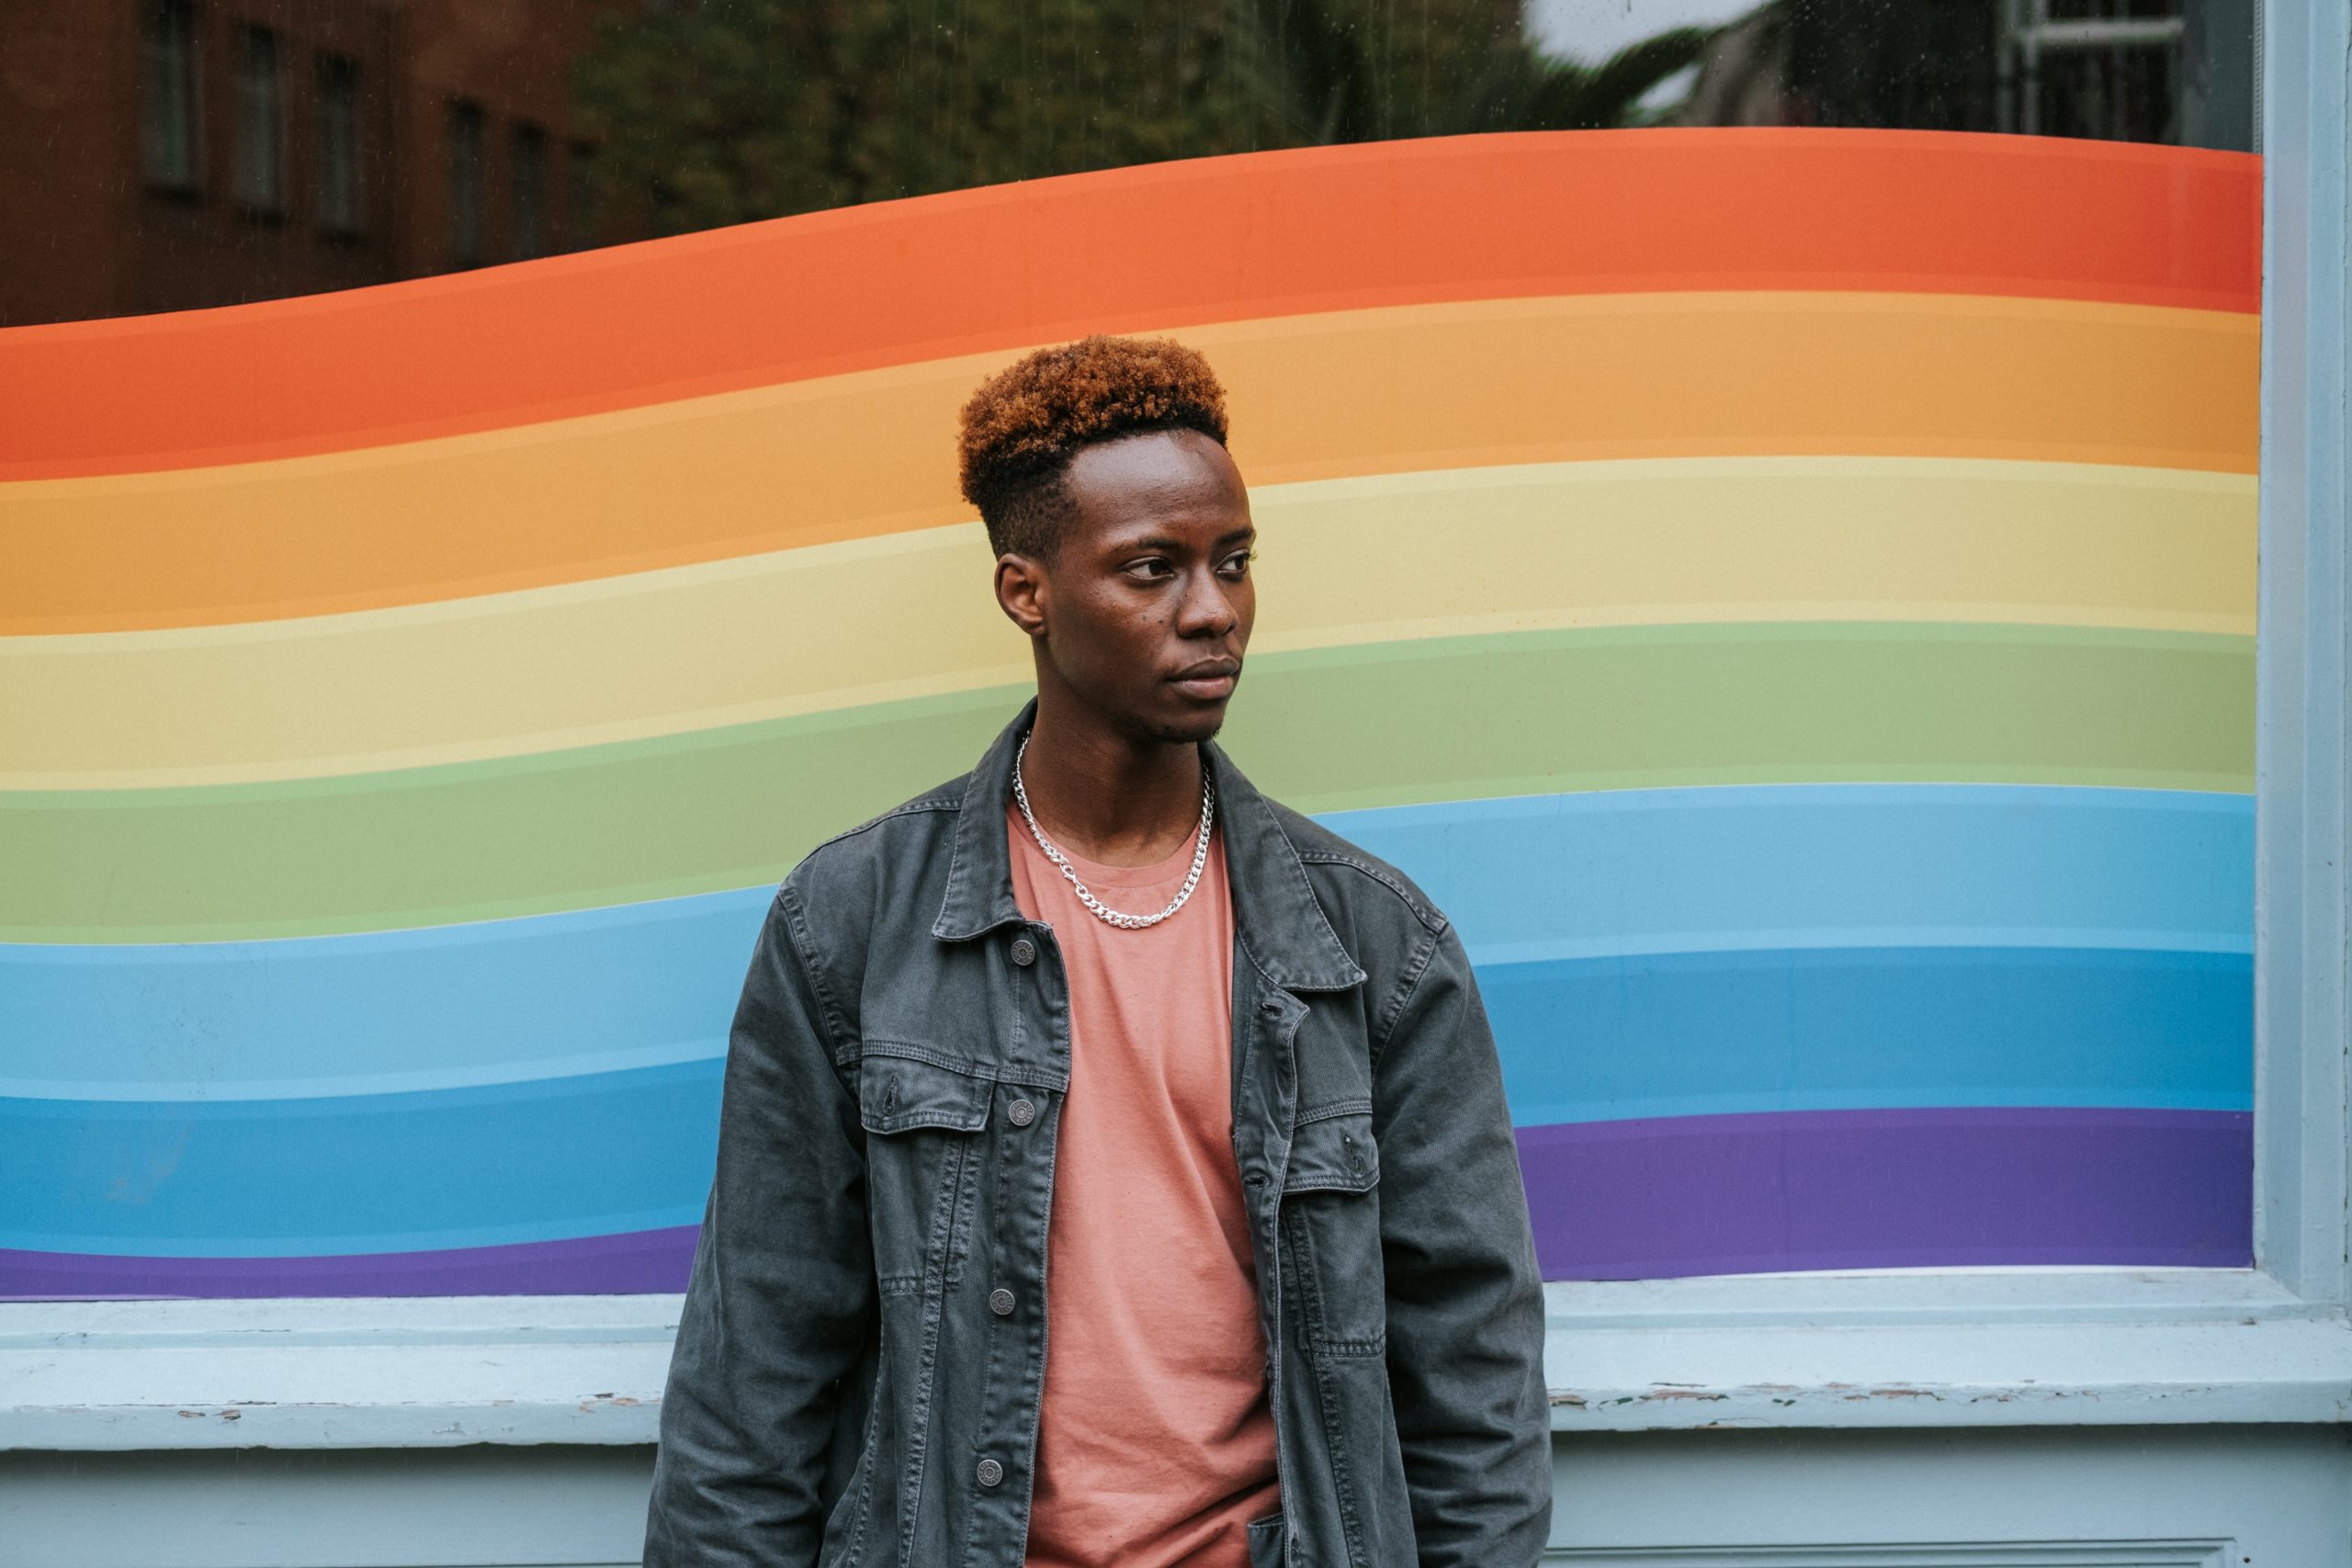 A young Black man stood in front of a rainbow window display